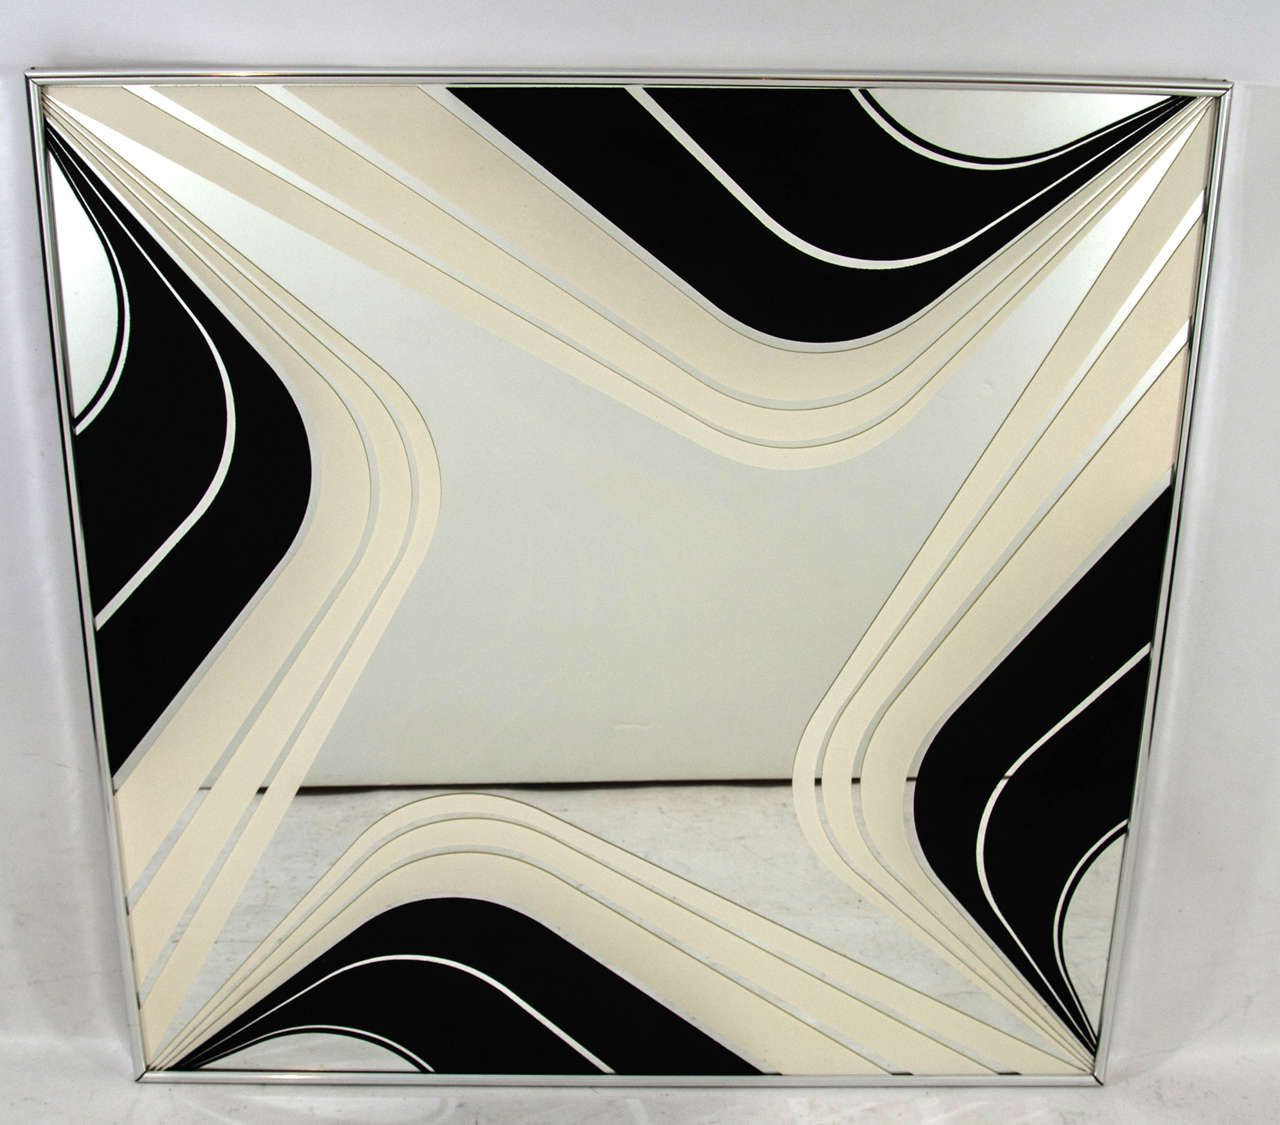 Wonderful mirror silk screened with a black and white motif. Please contact for location.